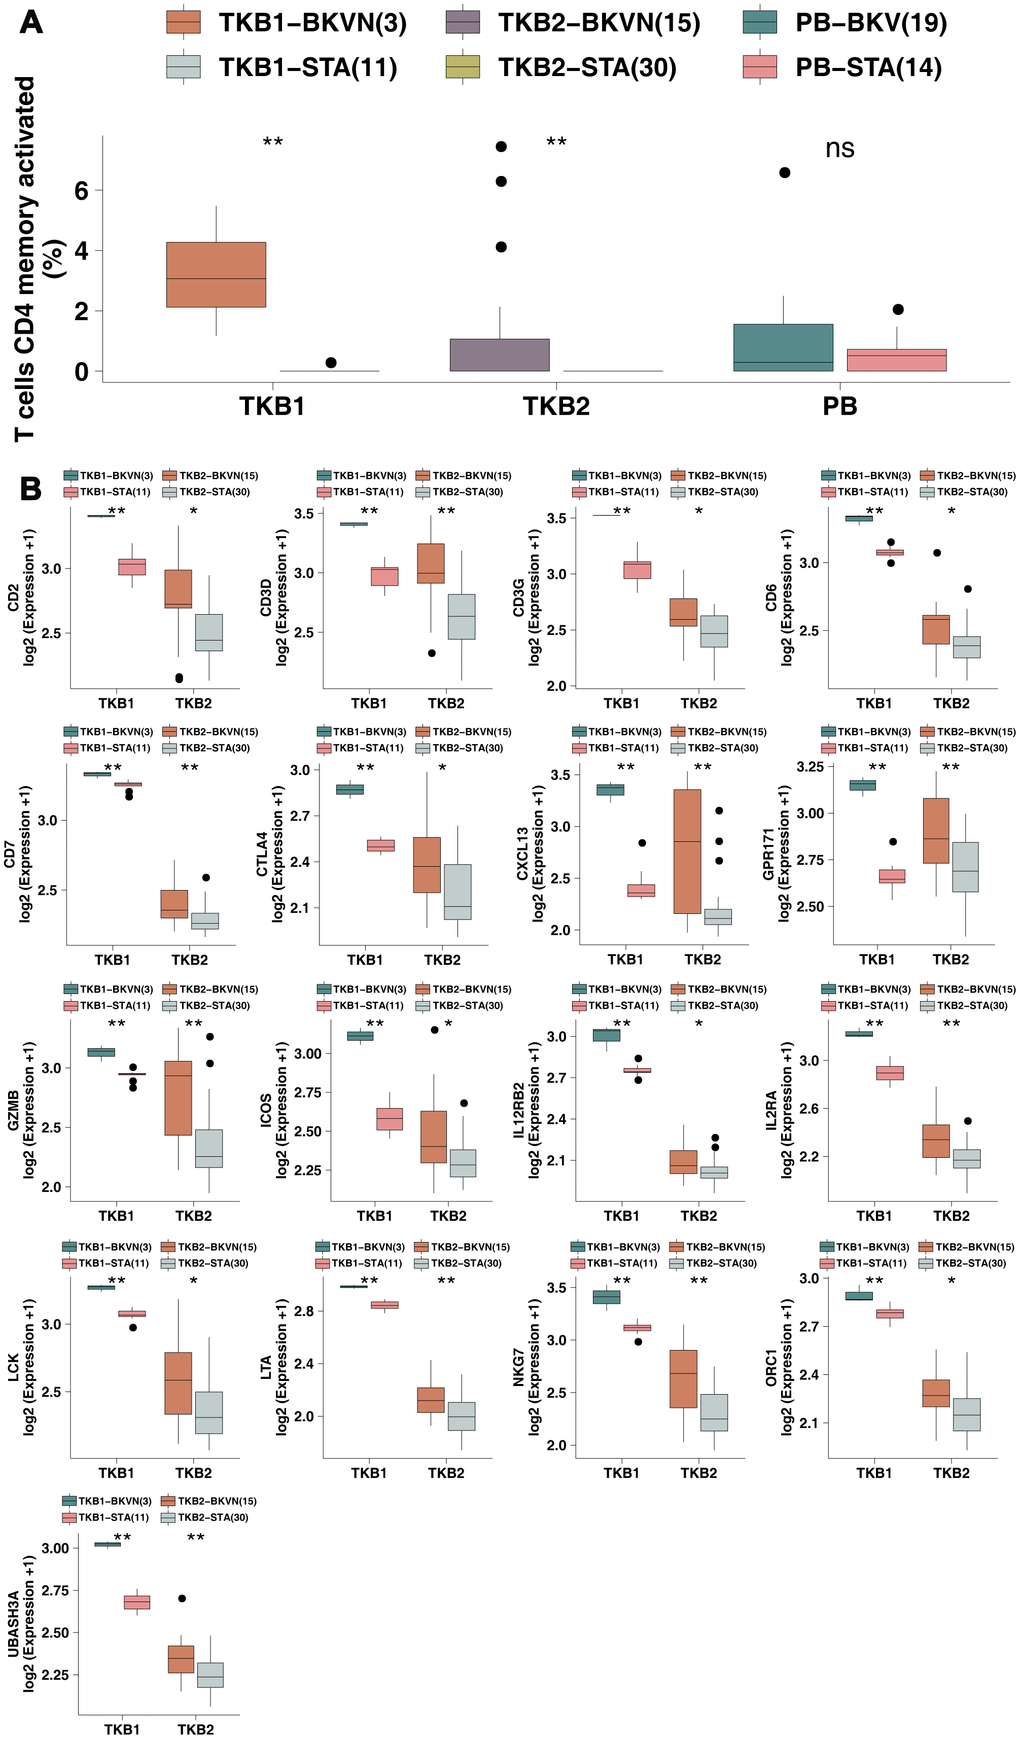 BKVN was associated with increased levels of activated memory CD4 T cells and their cell markers. (A) The proportions of activated memory CD4 T cells in the PB (STA and BKV), TKB1 (STA and BKVN) and TKB2 (STA and BKVN) datasets. (B) Comparison of the expression of cell markers of activated memory CD4 T cells between TKB1 (STA and BKVN) and TKB2 (STA and BKVN). The thick line represents the median value. The bottom and top of the boxes indicate the 25th and 75th percentiles (interquartile range). The whiskers encompass 1.5 times the interquartile range. *, P